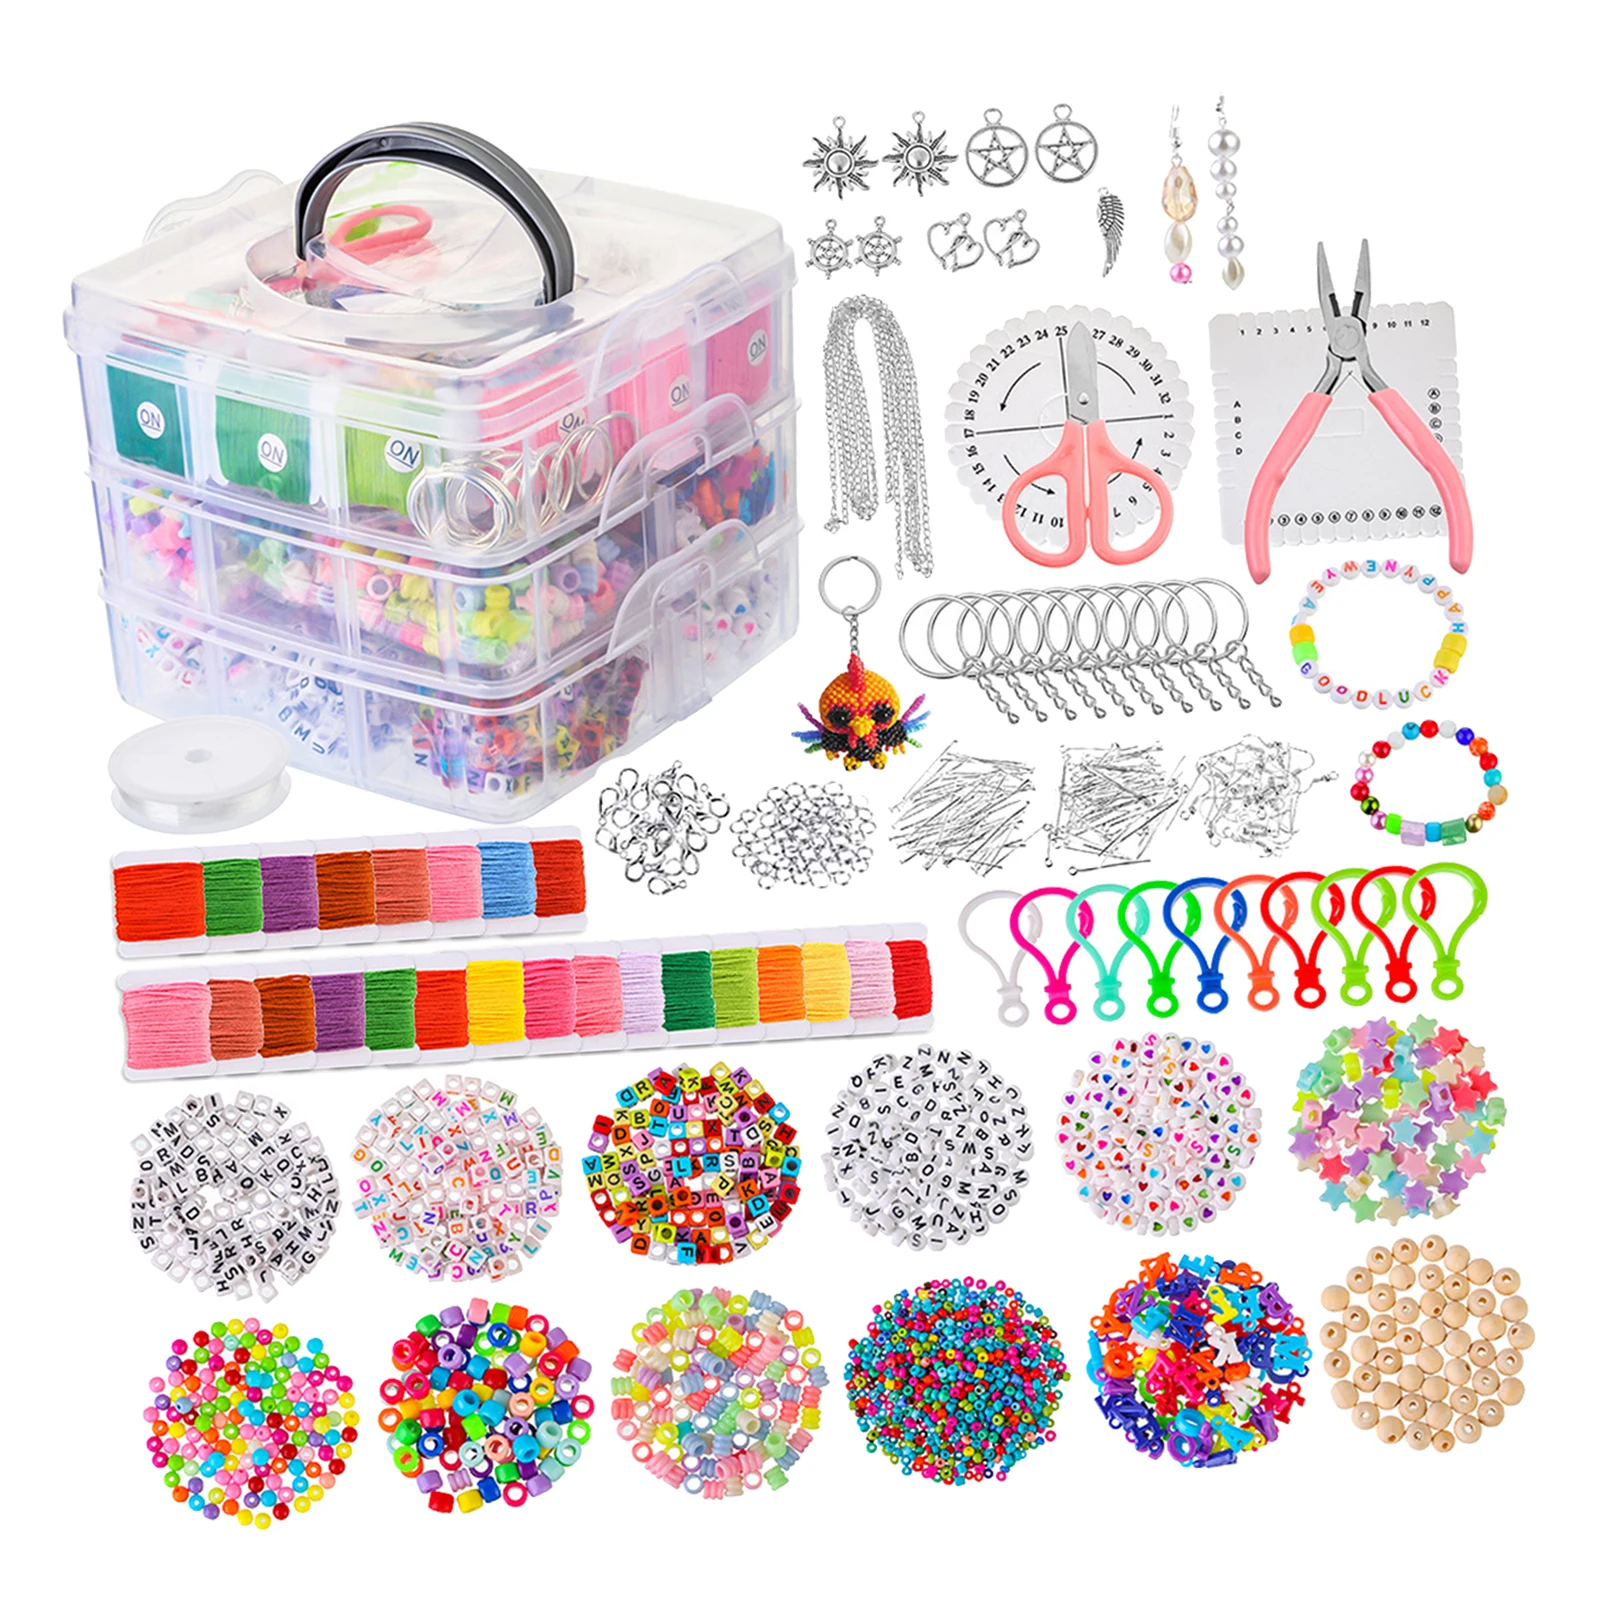 Jewelry Making Supplies Kit with Instructions 4655 Pieces DIY in a Storage Case